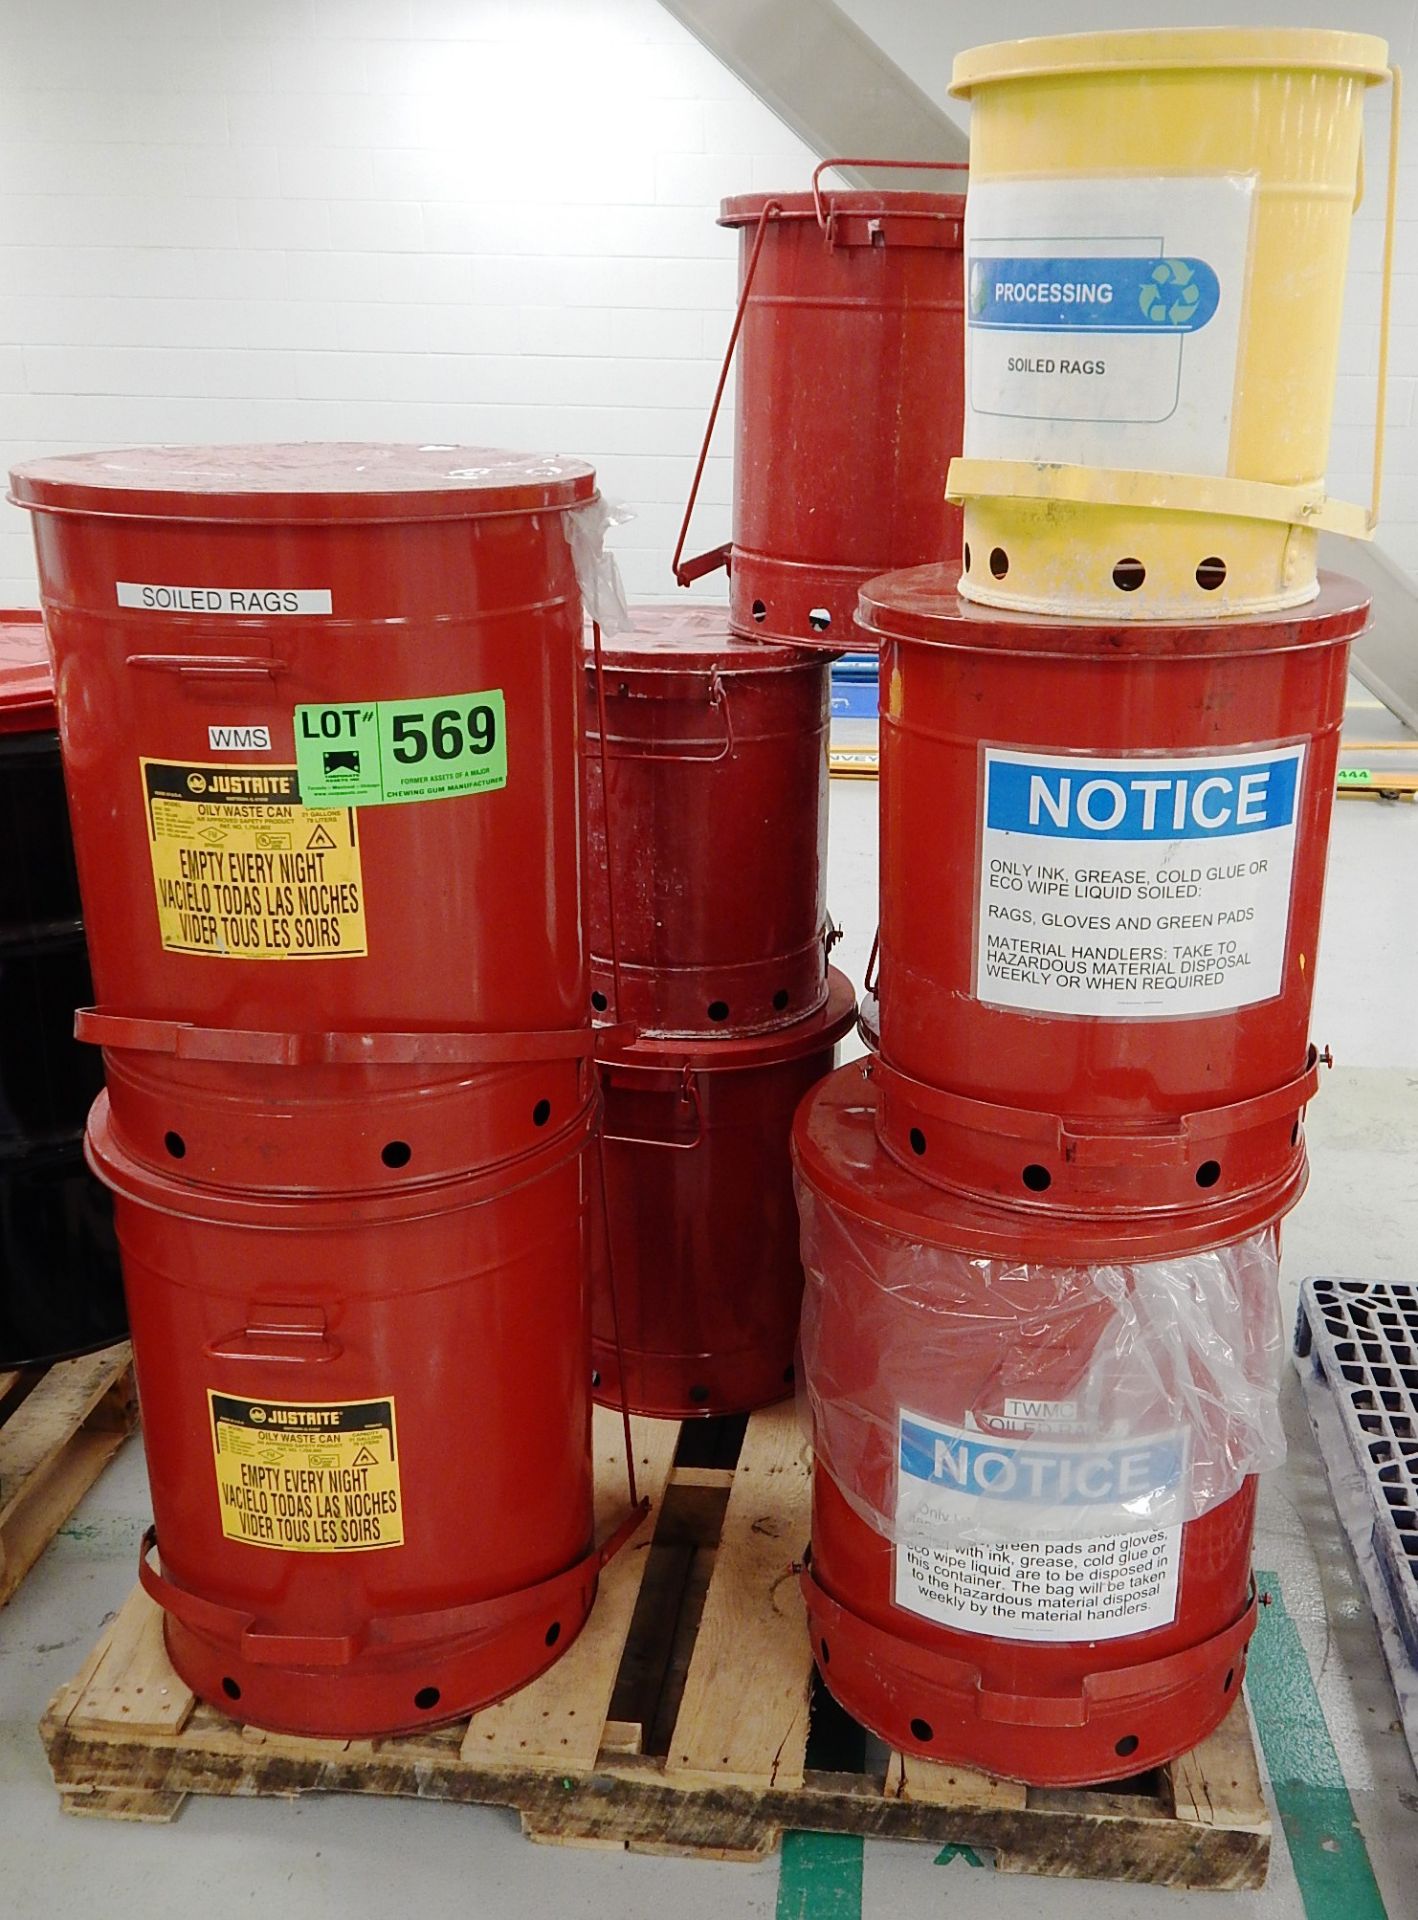 LOT/ JUSTRITE OIL DISPOSAL WASTE CANS